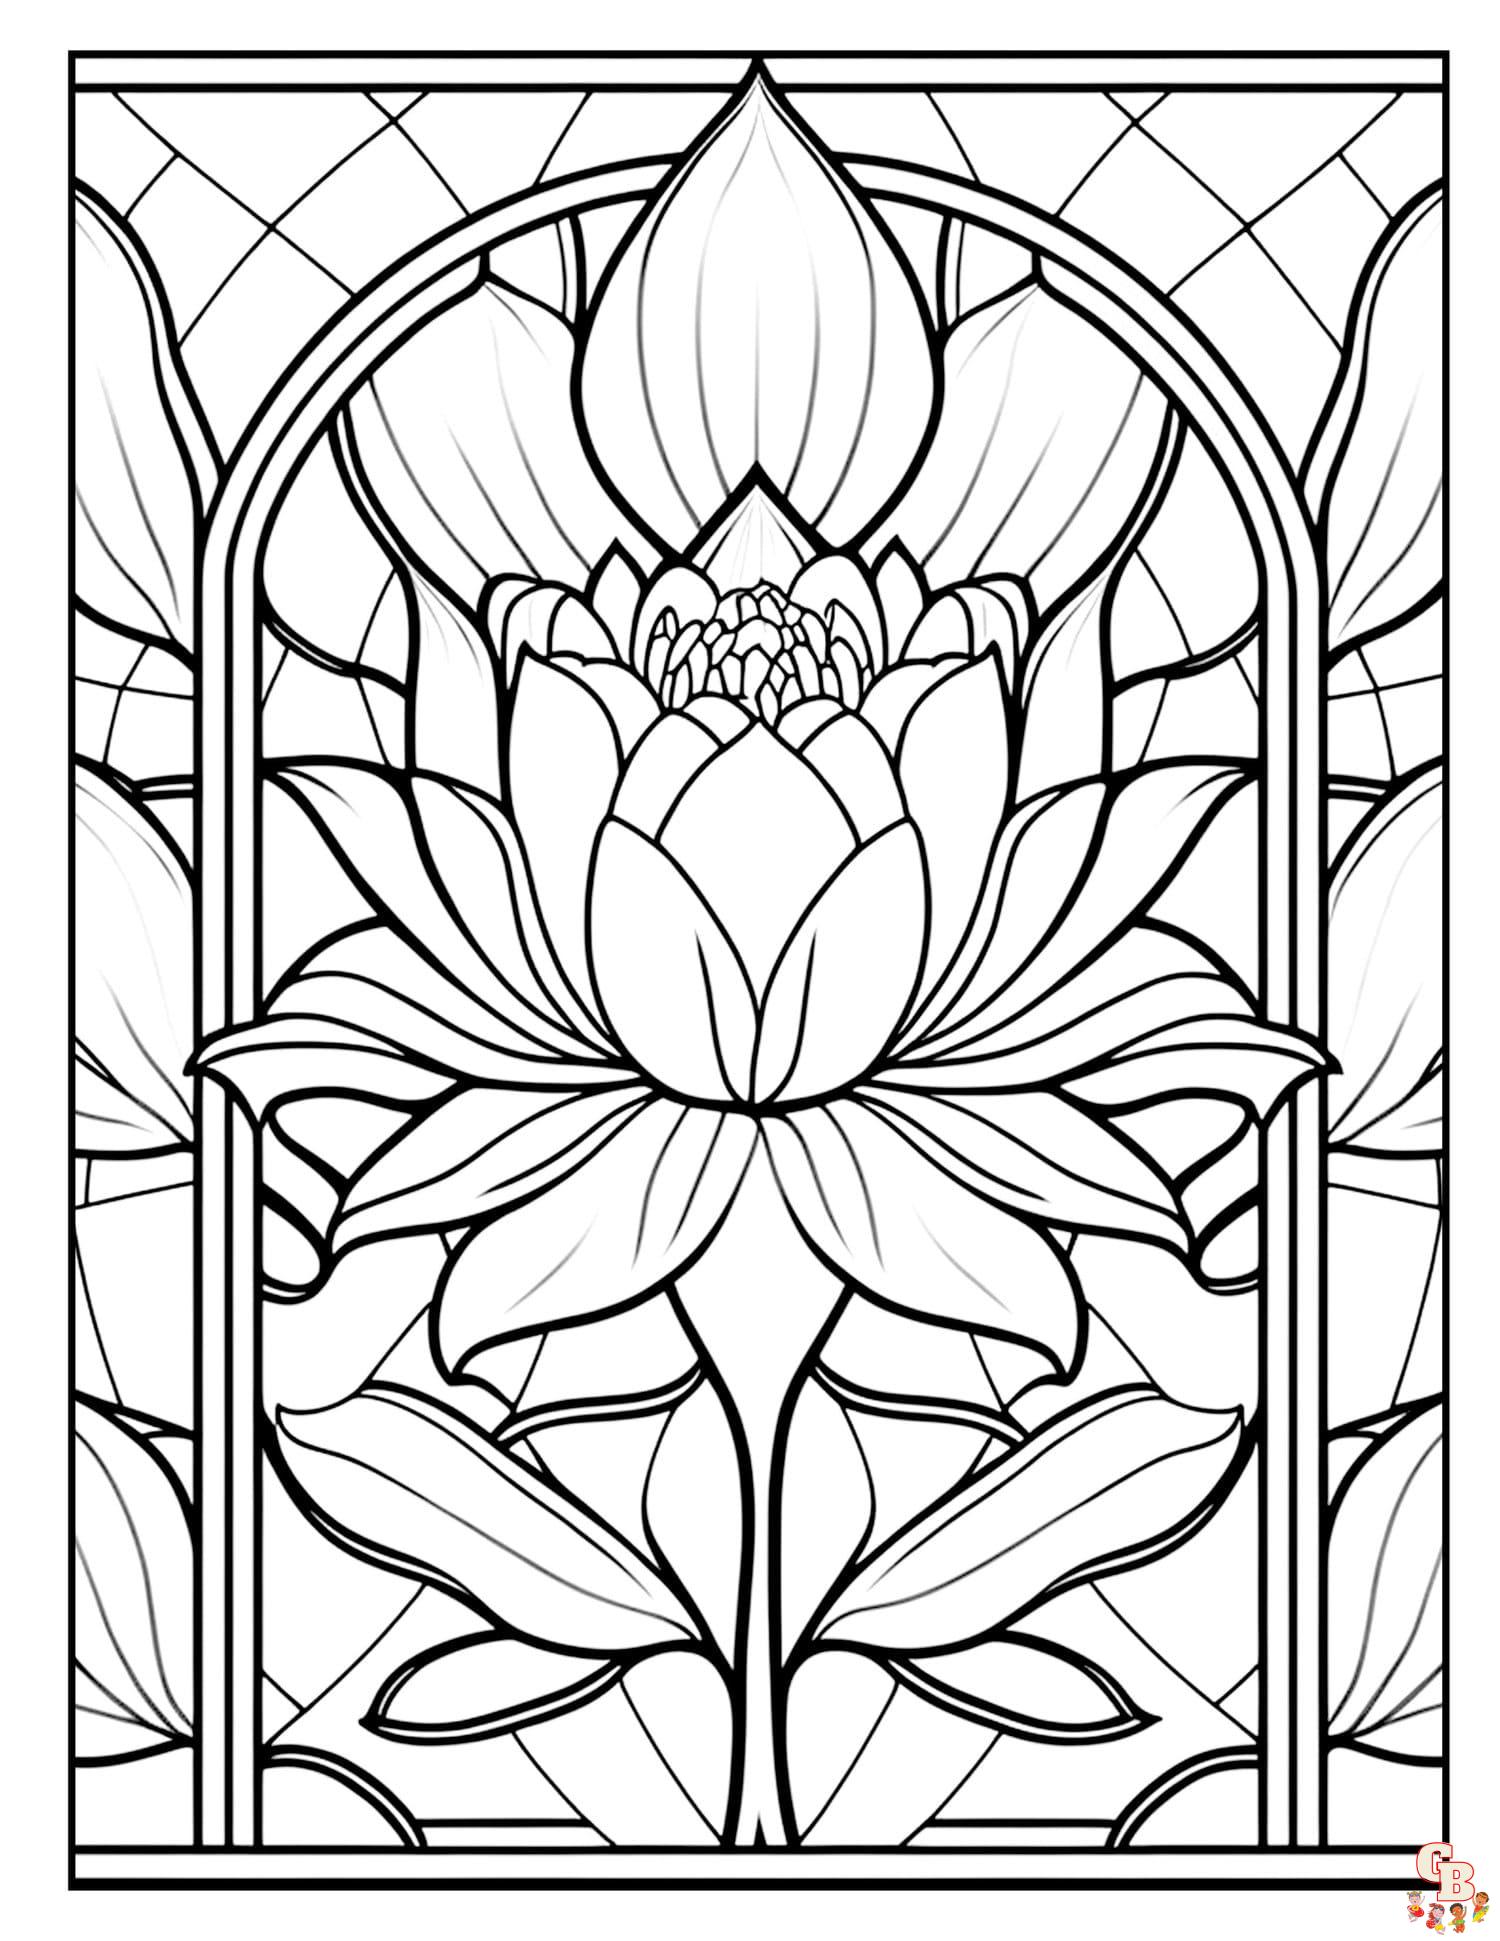 Stained glass coloring pages to print